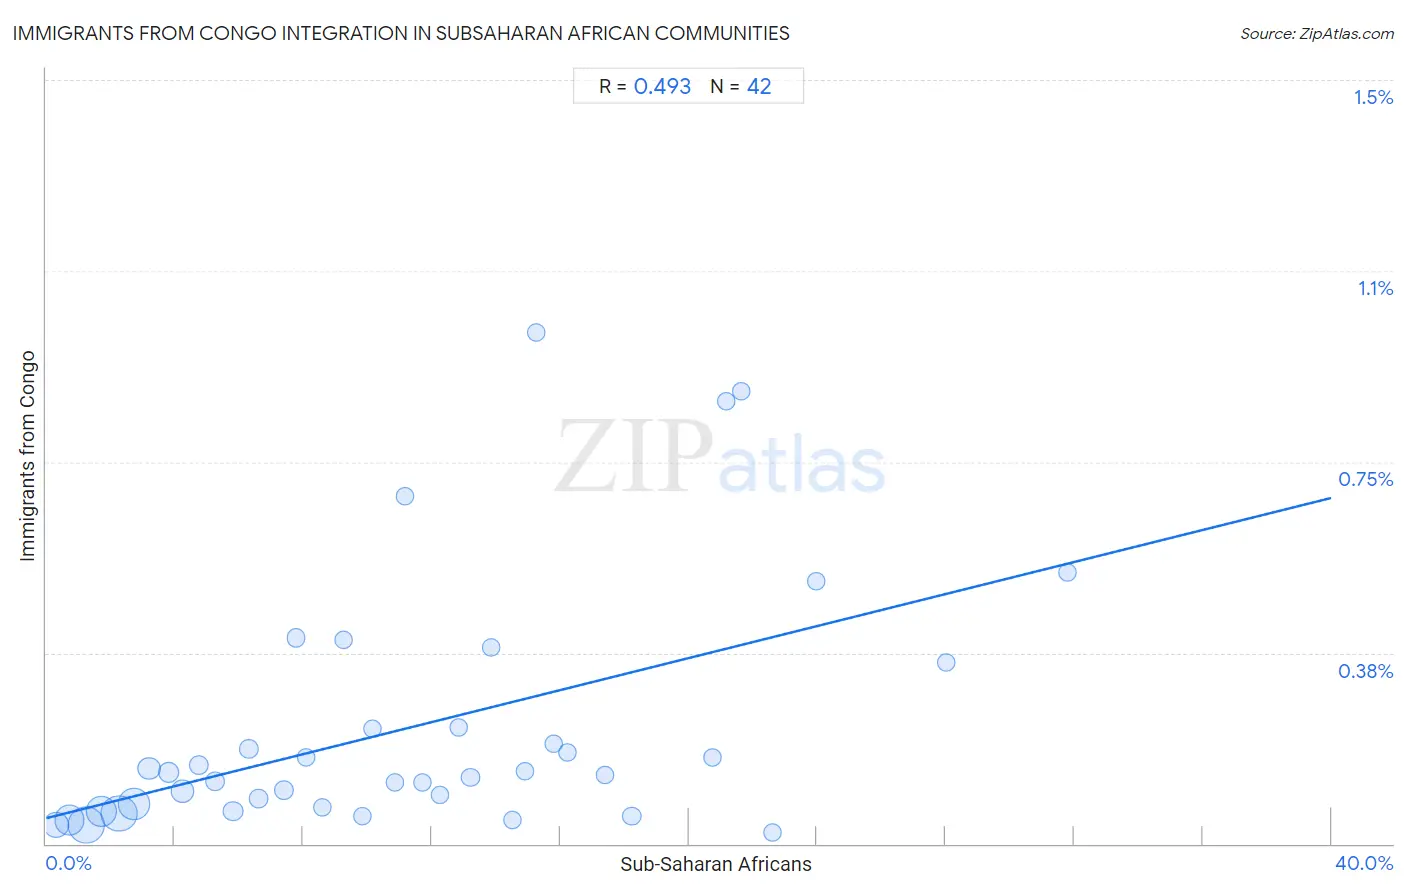 Subsaharan African Integration in Immigrants from Congo Communities